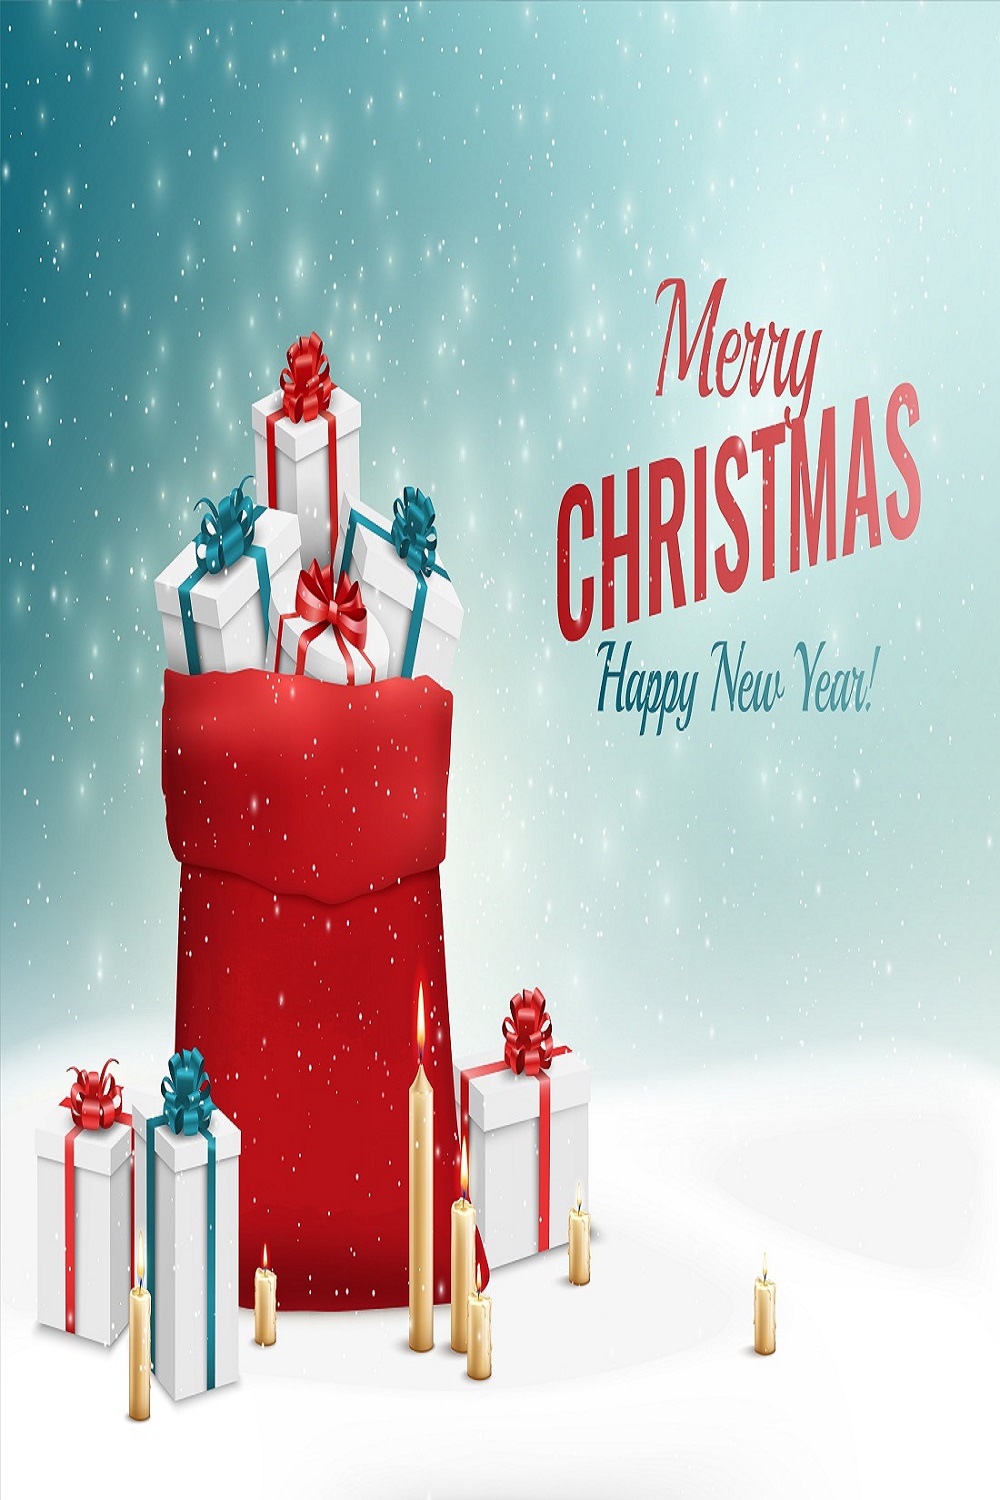 Merry Christmas happy new year greeting card pinterest preview image.